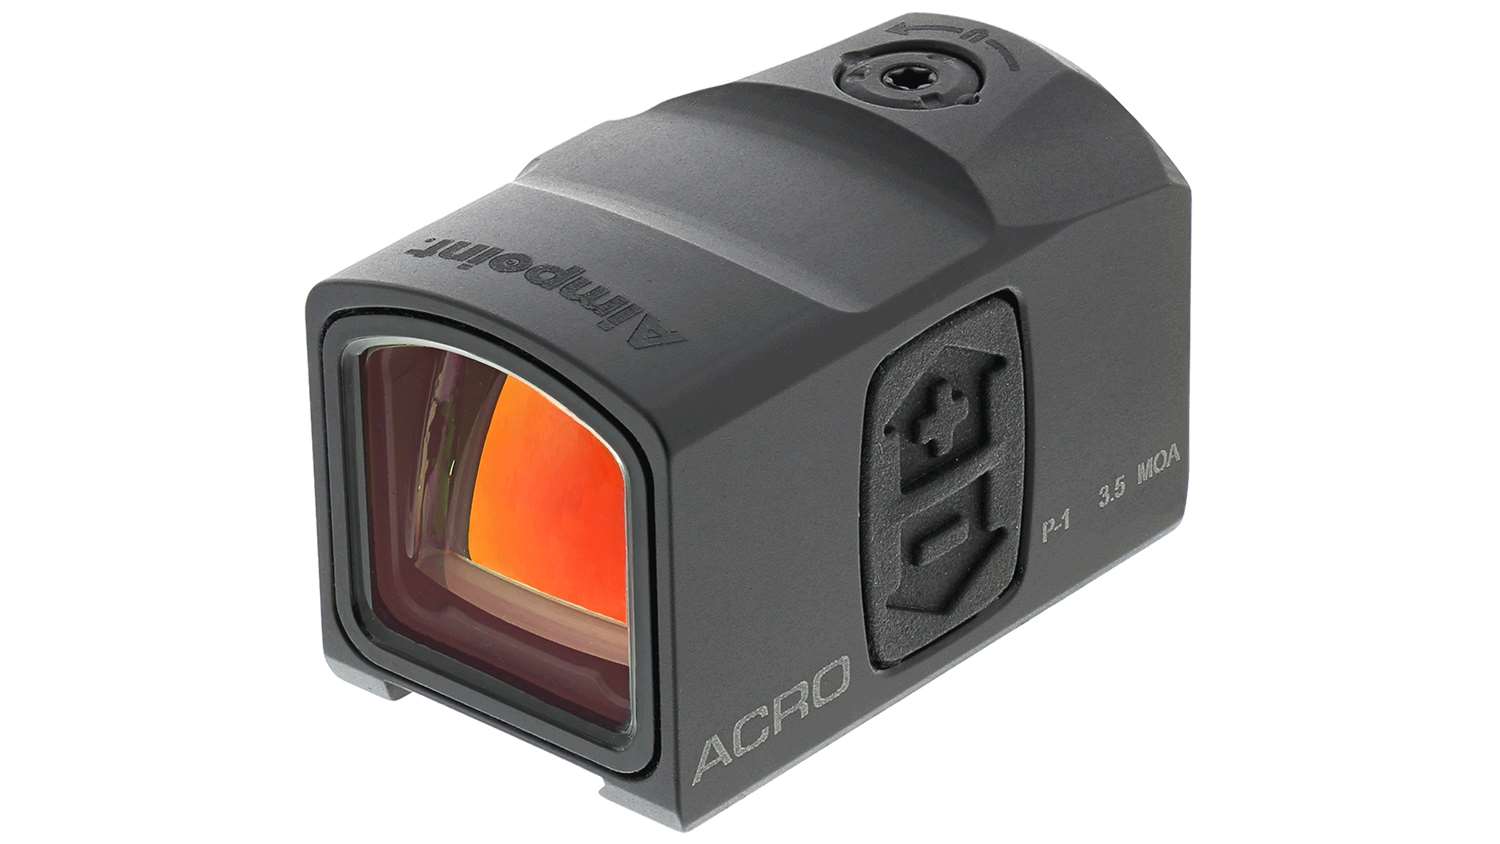 Acro P-1 micro red dot reflex sight by Aimpoint